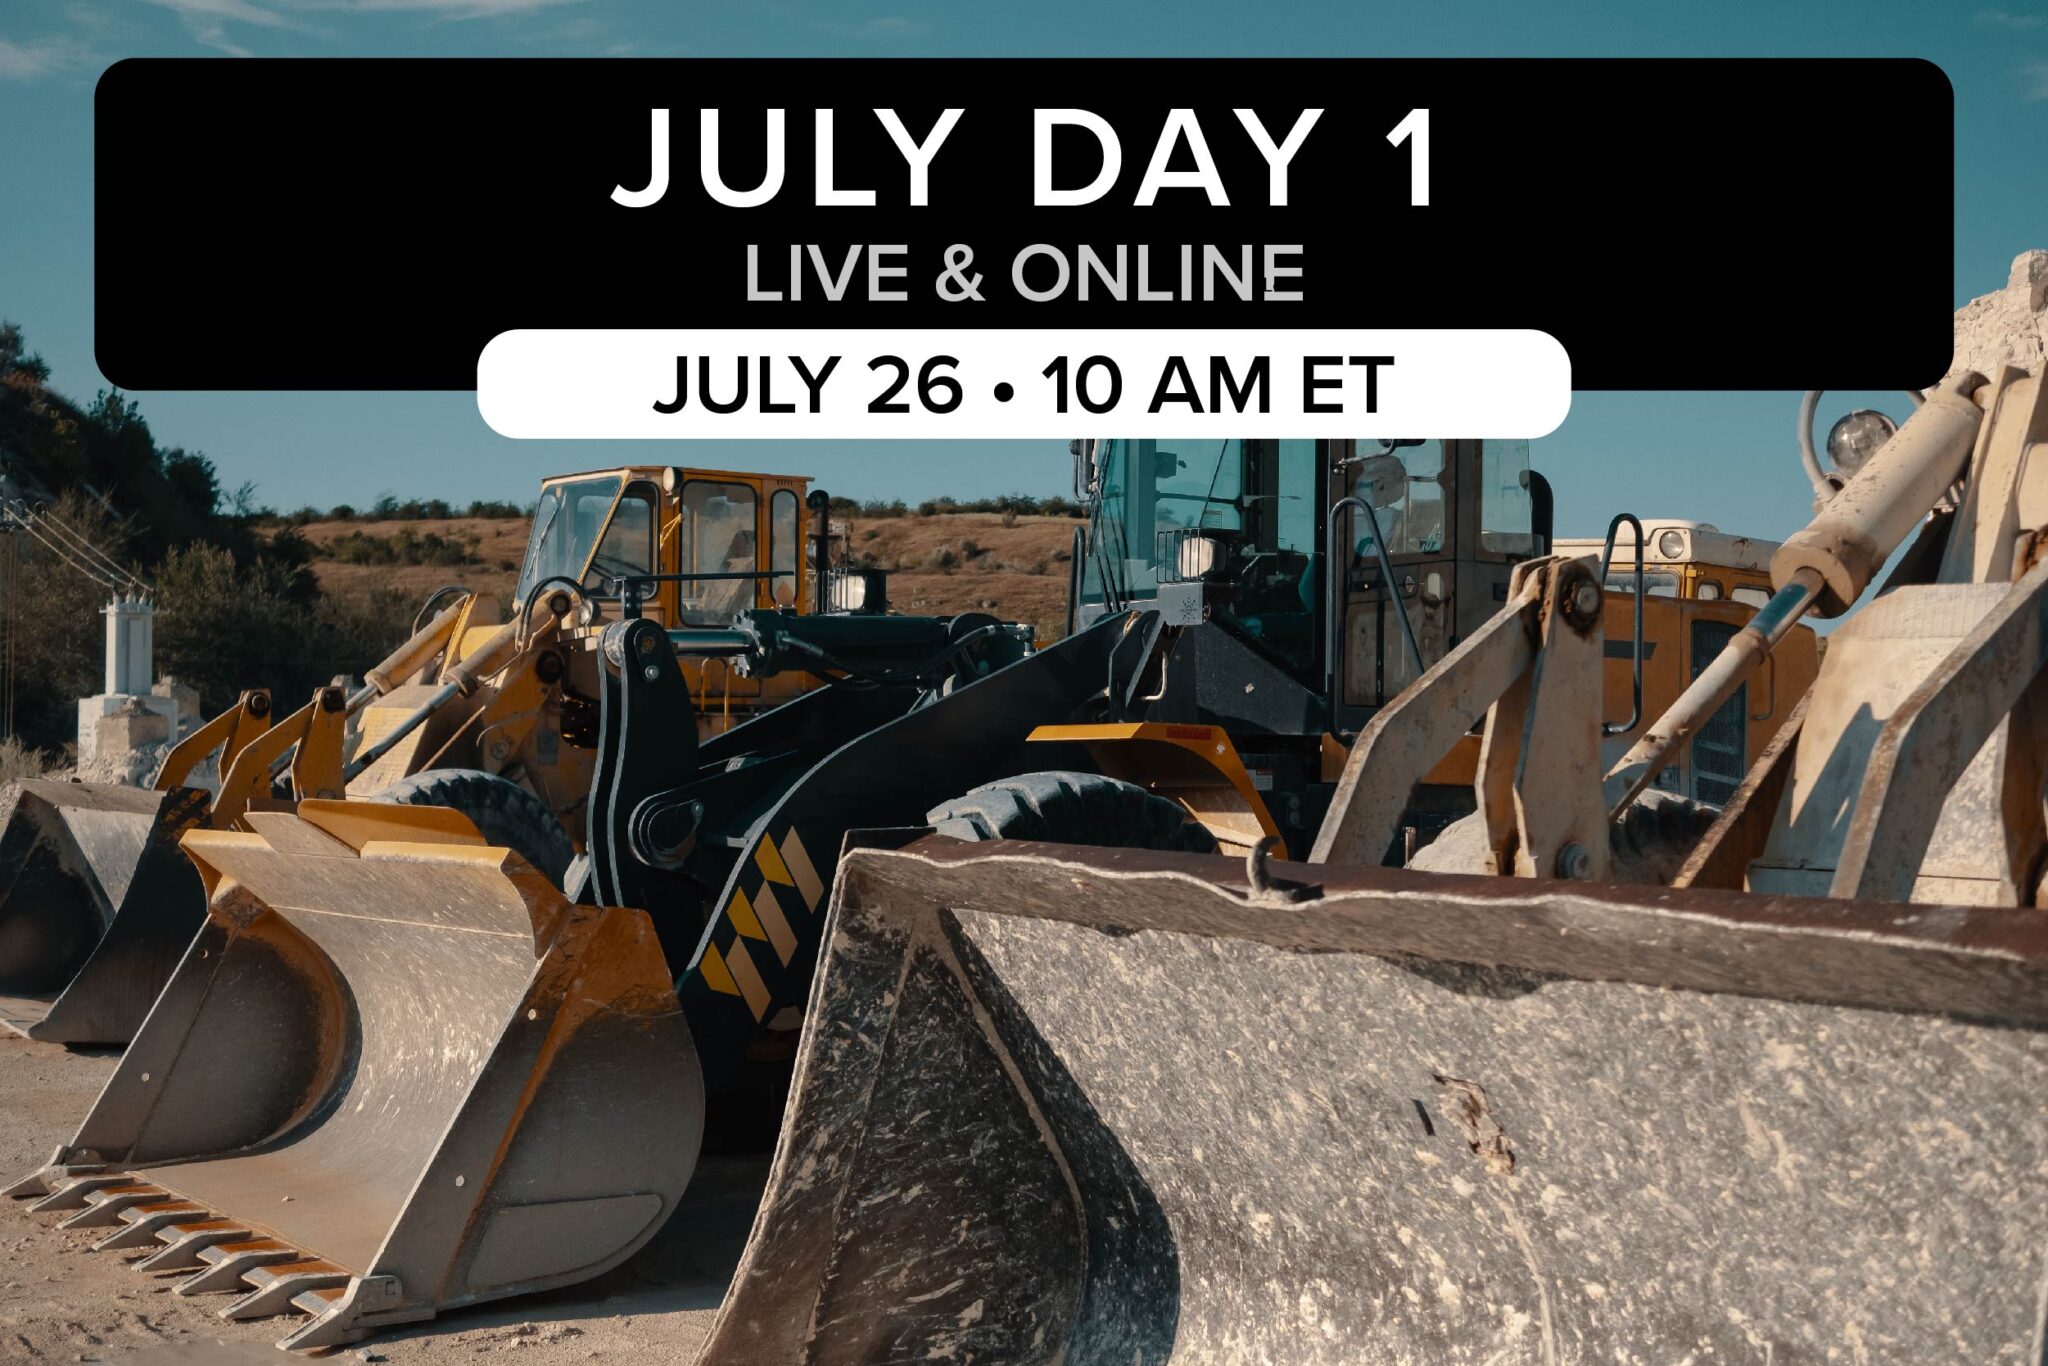 previewtiles-JULY2023_JULY 26-LG